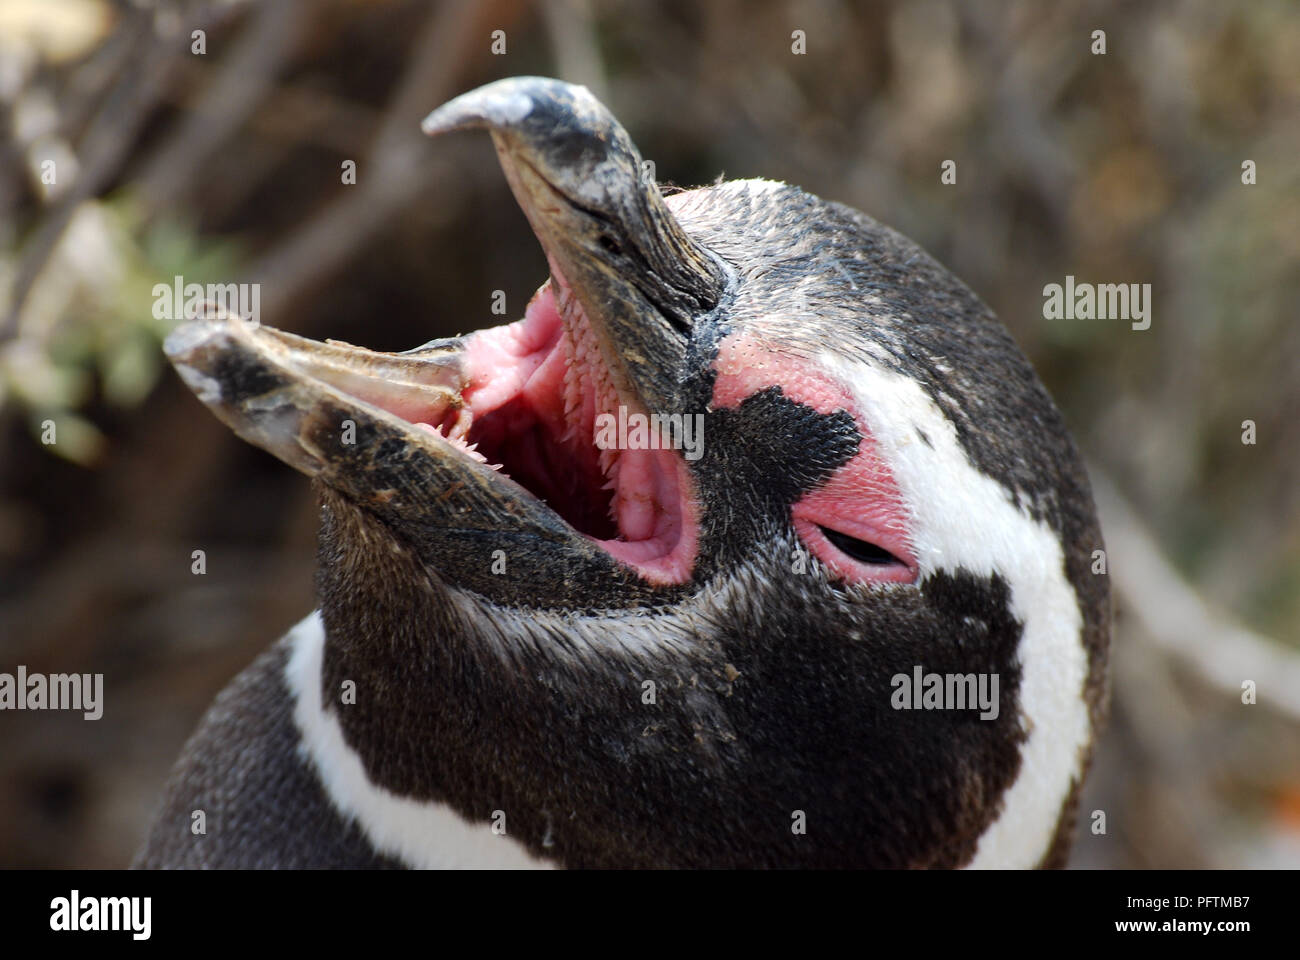 A very close portrait of a young penguin , Punta Tombo , Patagonia Argentina Stock Photo